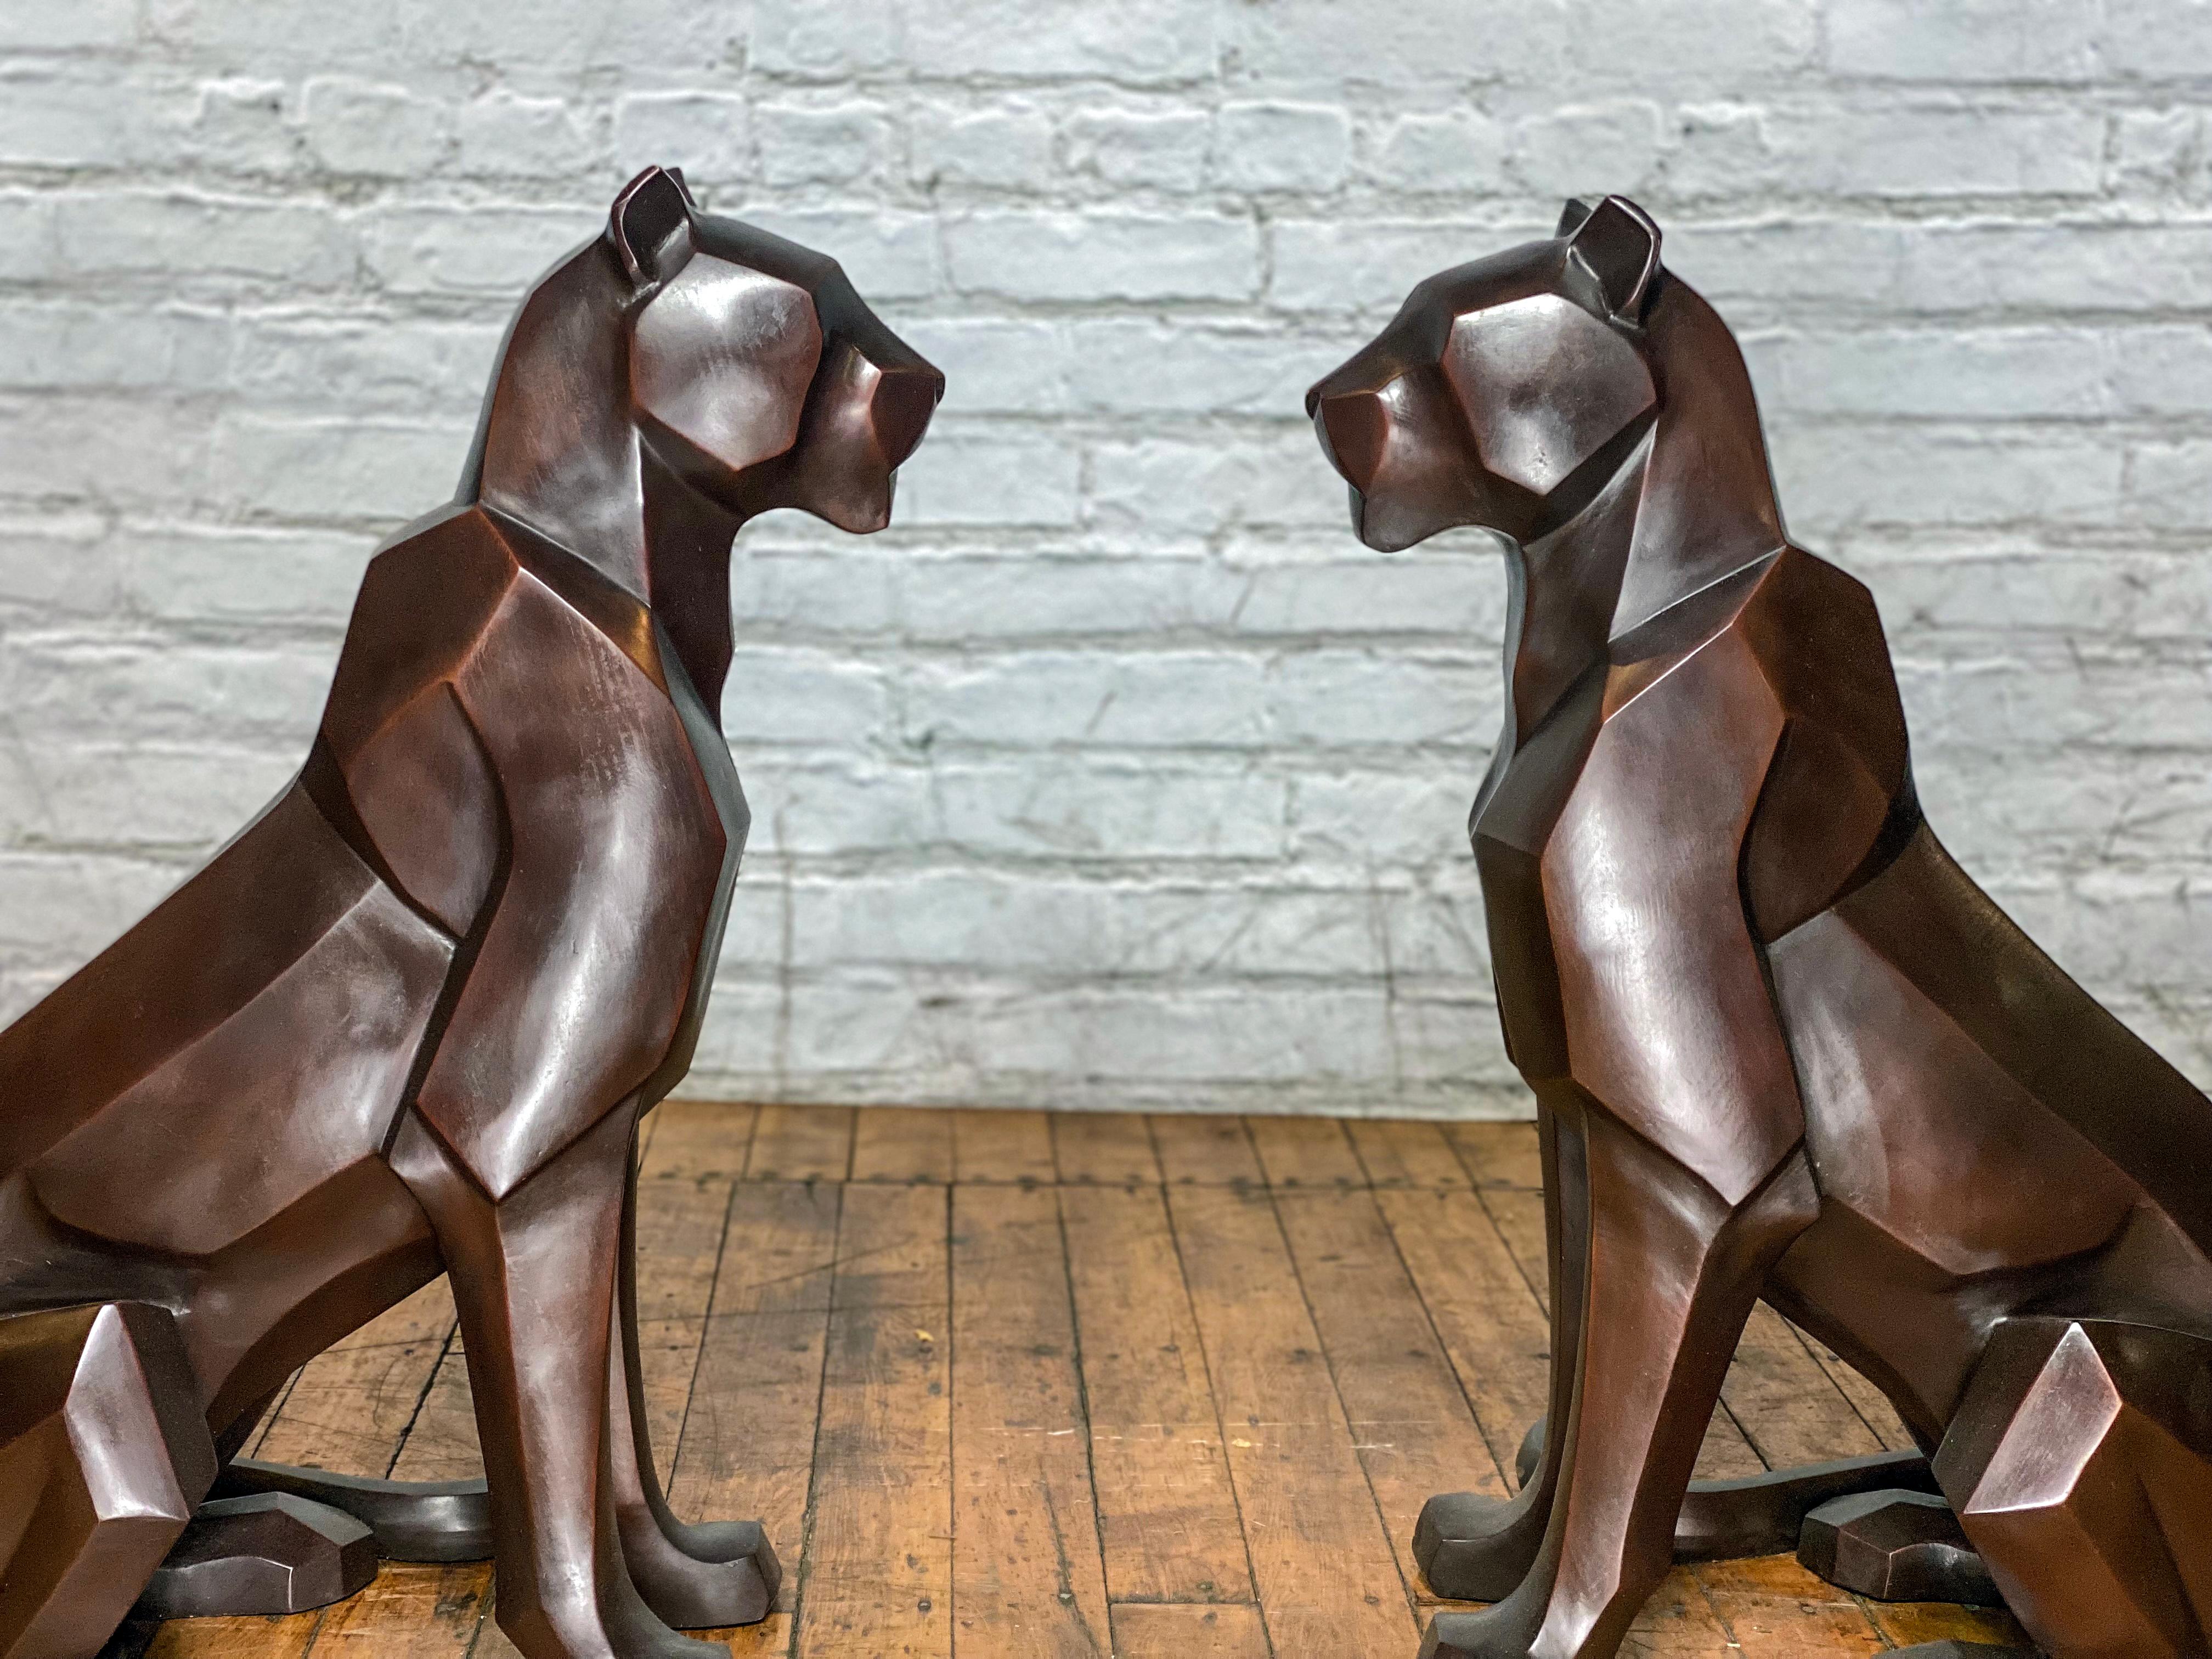 A stunning and modern addition to our bronze animals collection, our pair of lost-wax bronze mountain lion statues. These eye-catching bronze mountain lion statues are designed and cast from an original custom mold featuring unique abstract